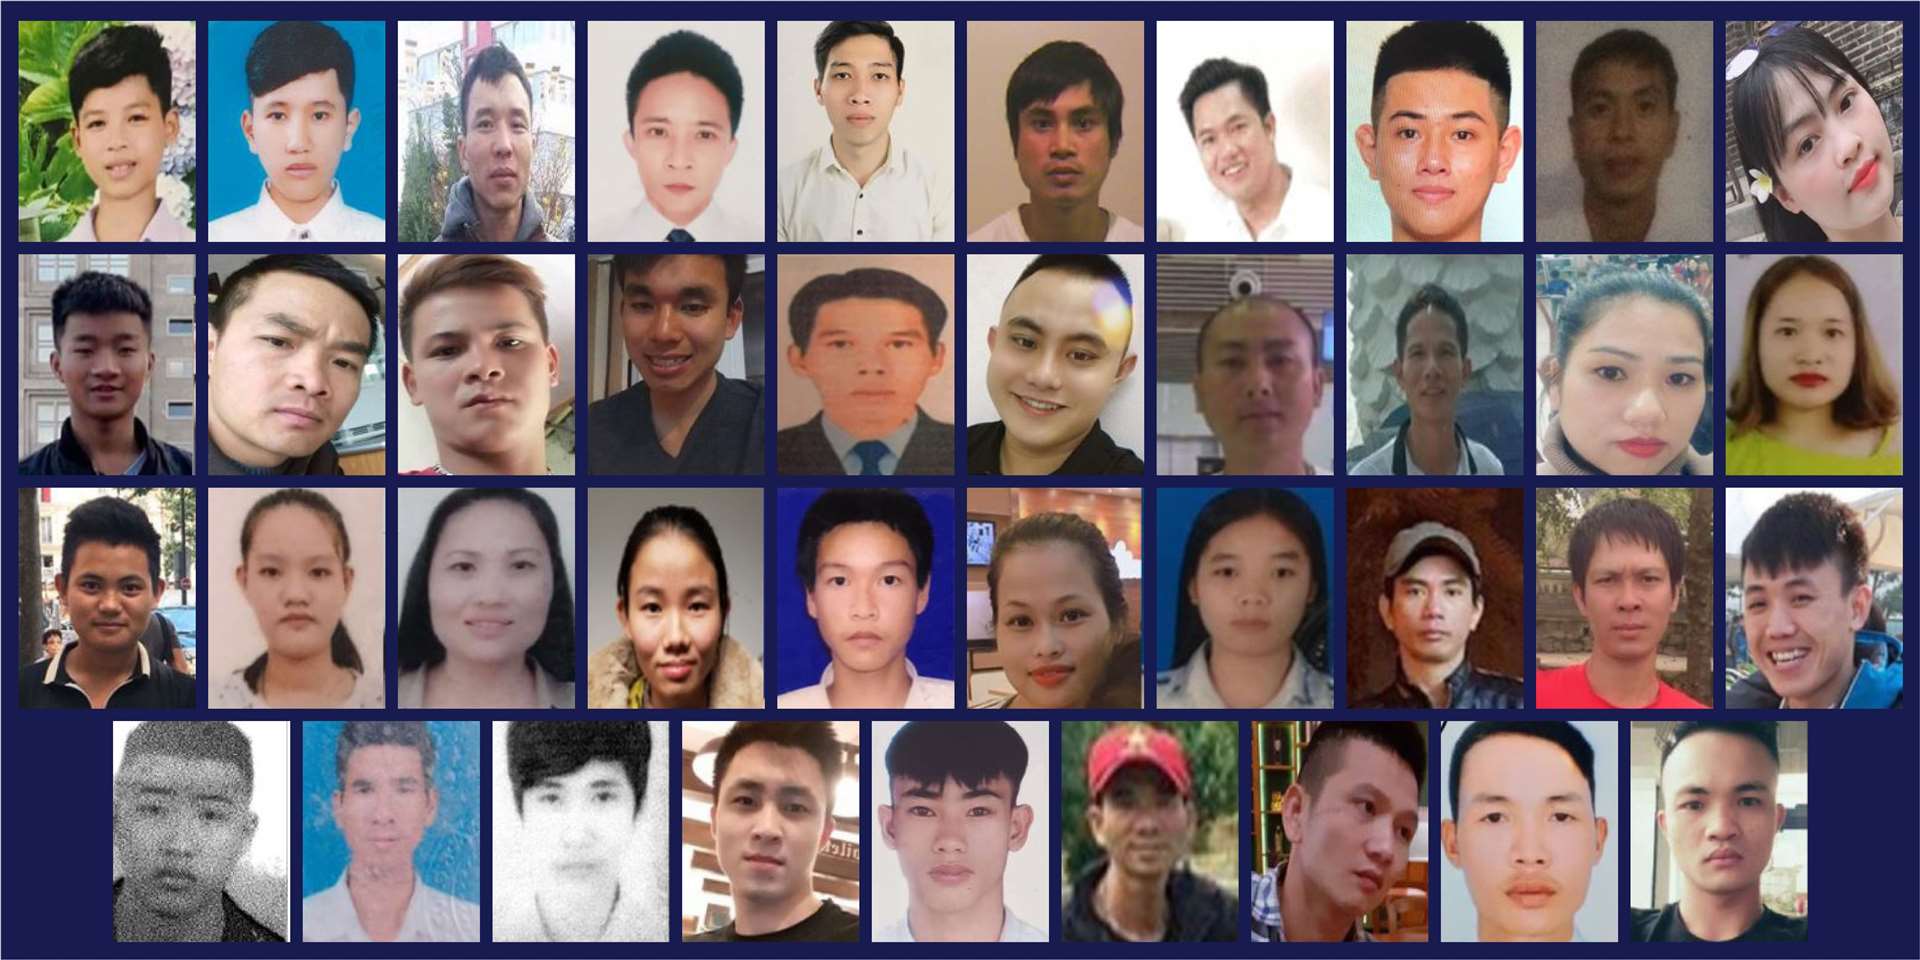 The 39 migrants who died in 2019. Picture: Essex Police